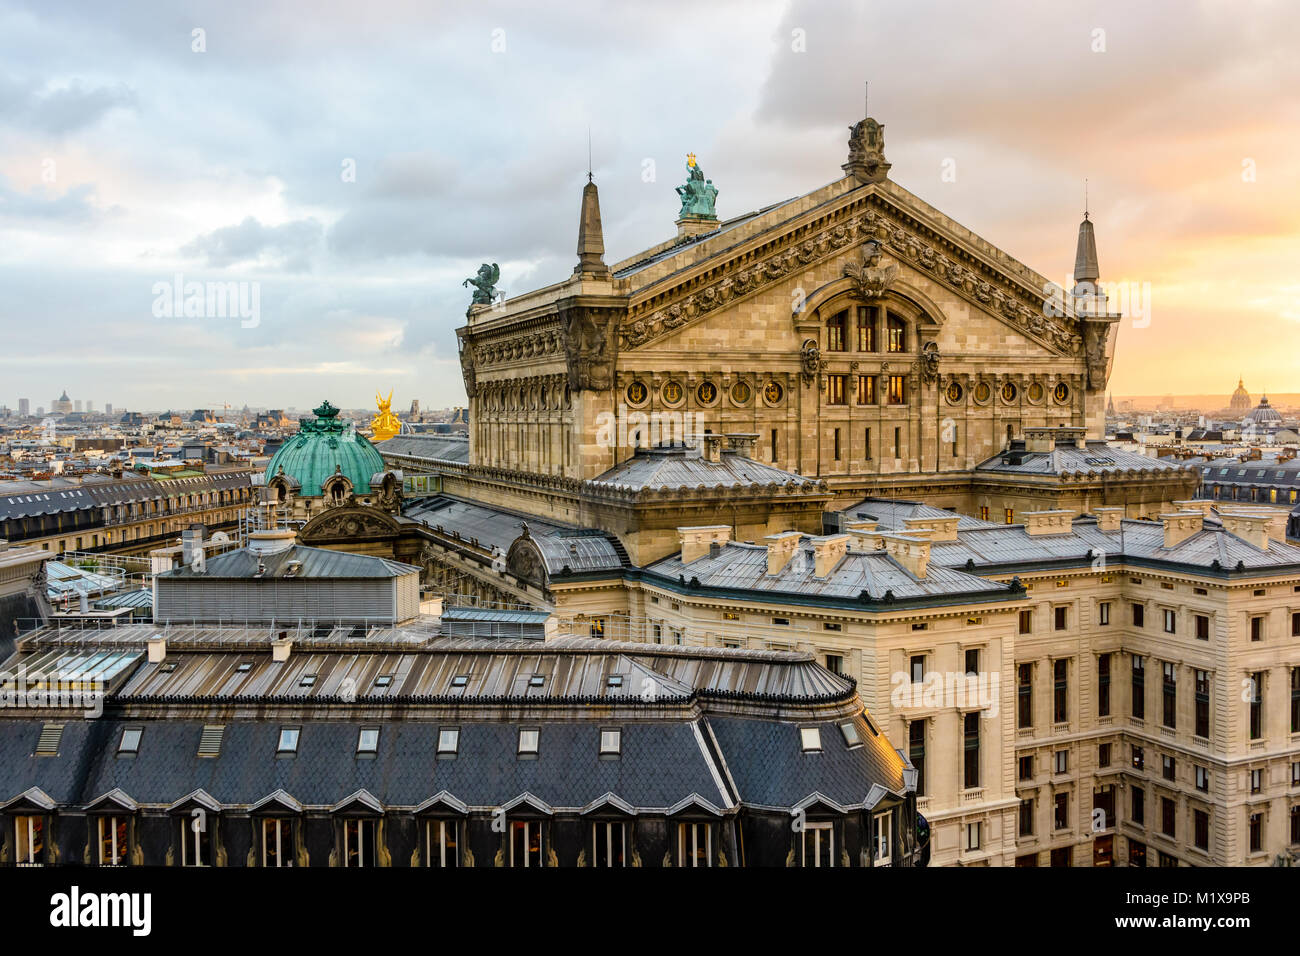 Rear view of the Opera Garnier in Paris at sunset showing the northern pediment of the stage house and the administration offices with the roofs of th Stock Photo